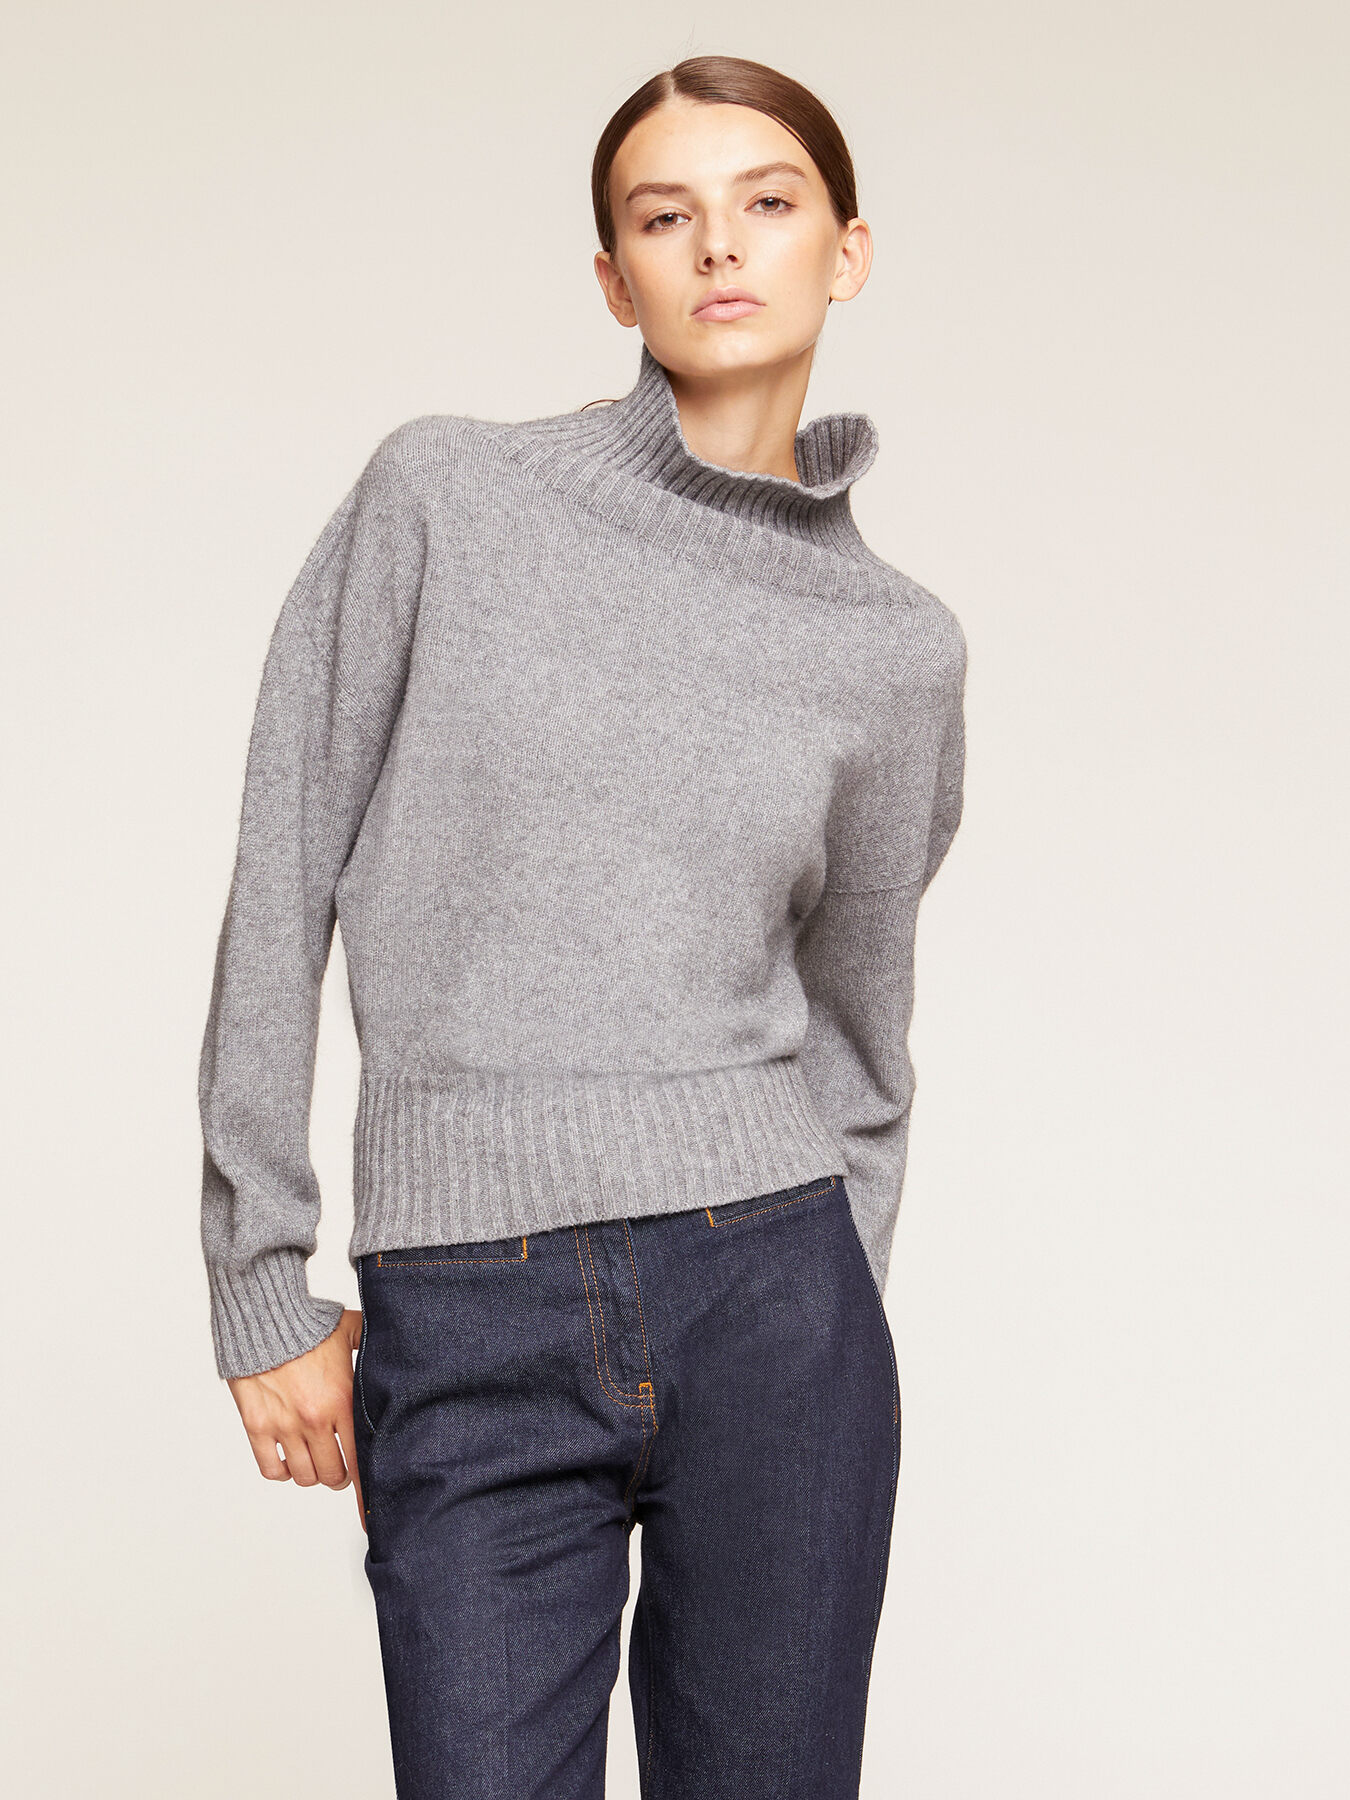 Oversized sweater with back cut-out feature image number 0